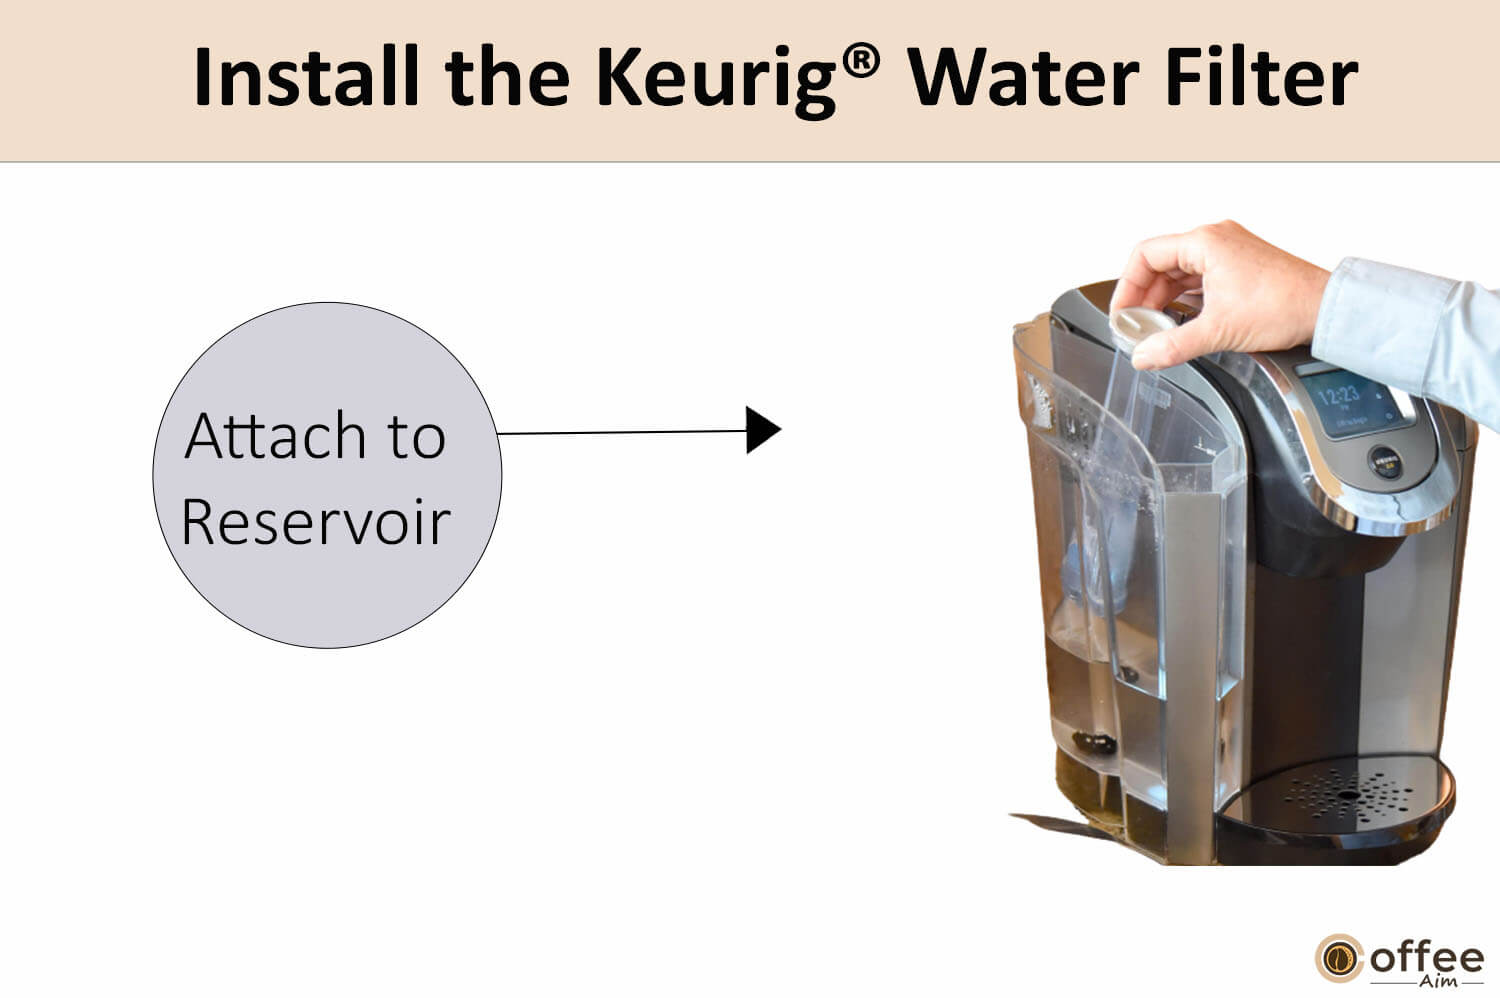 In this image, I have delineated the Install the keurig water filter.